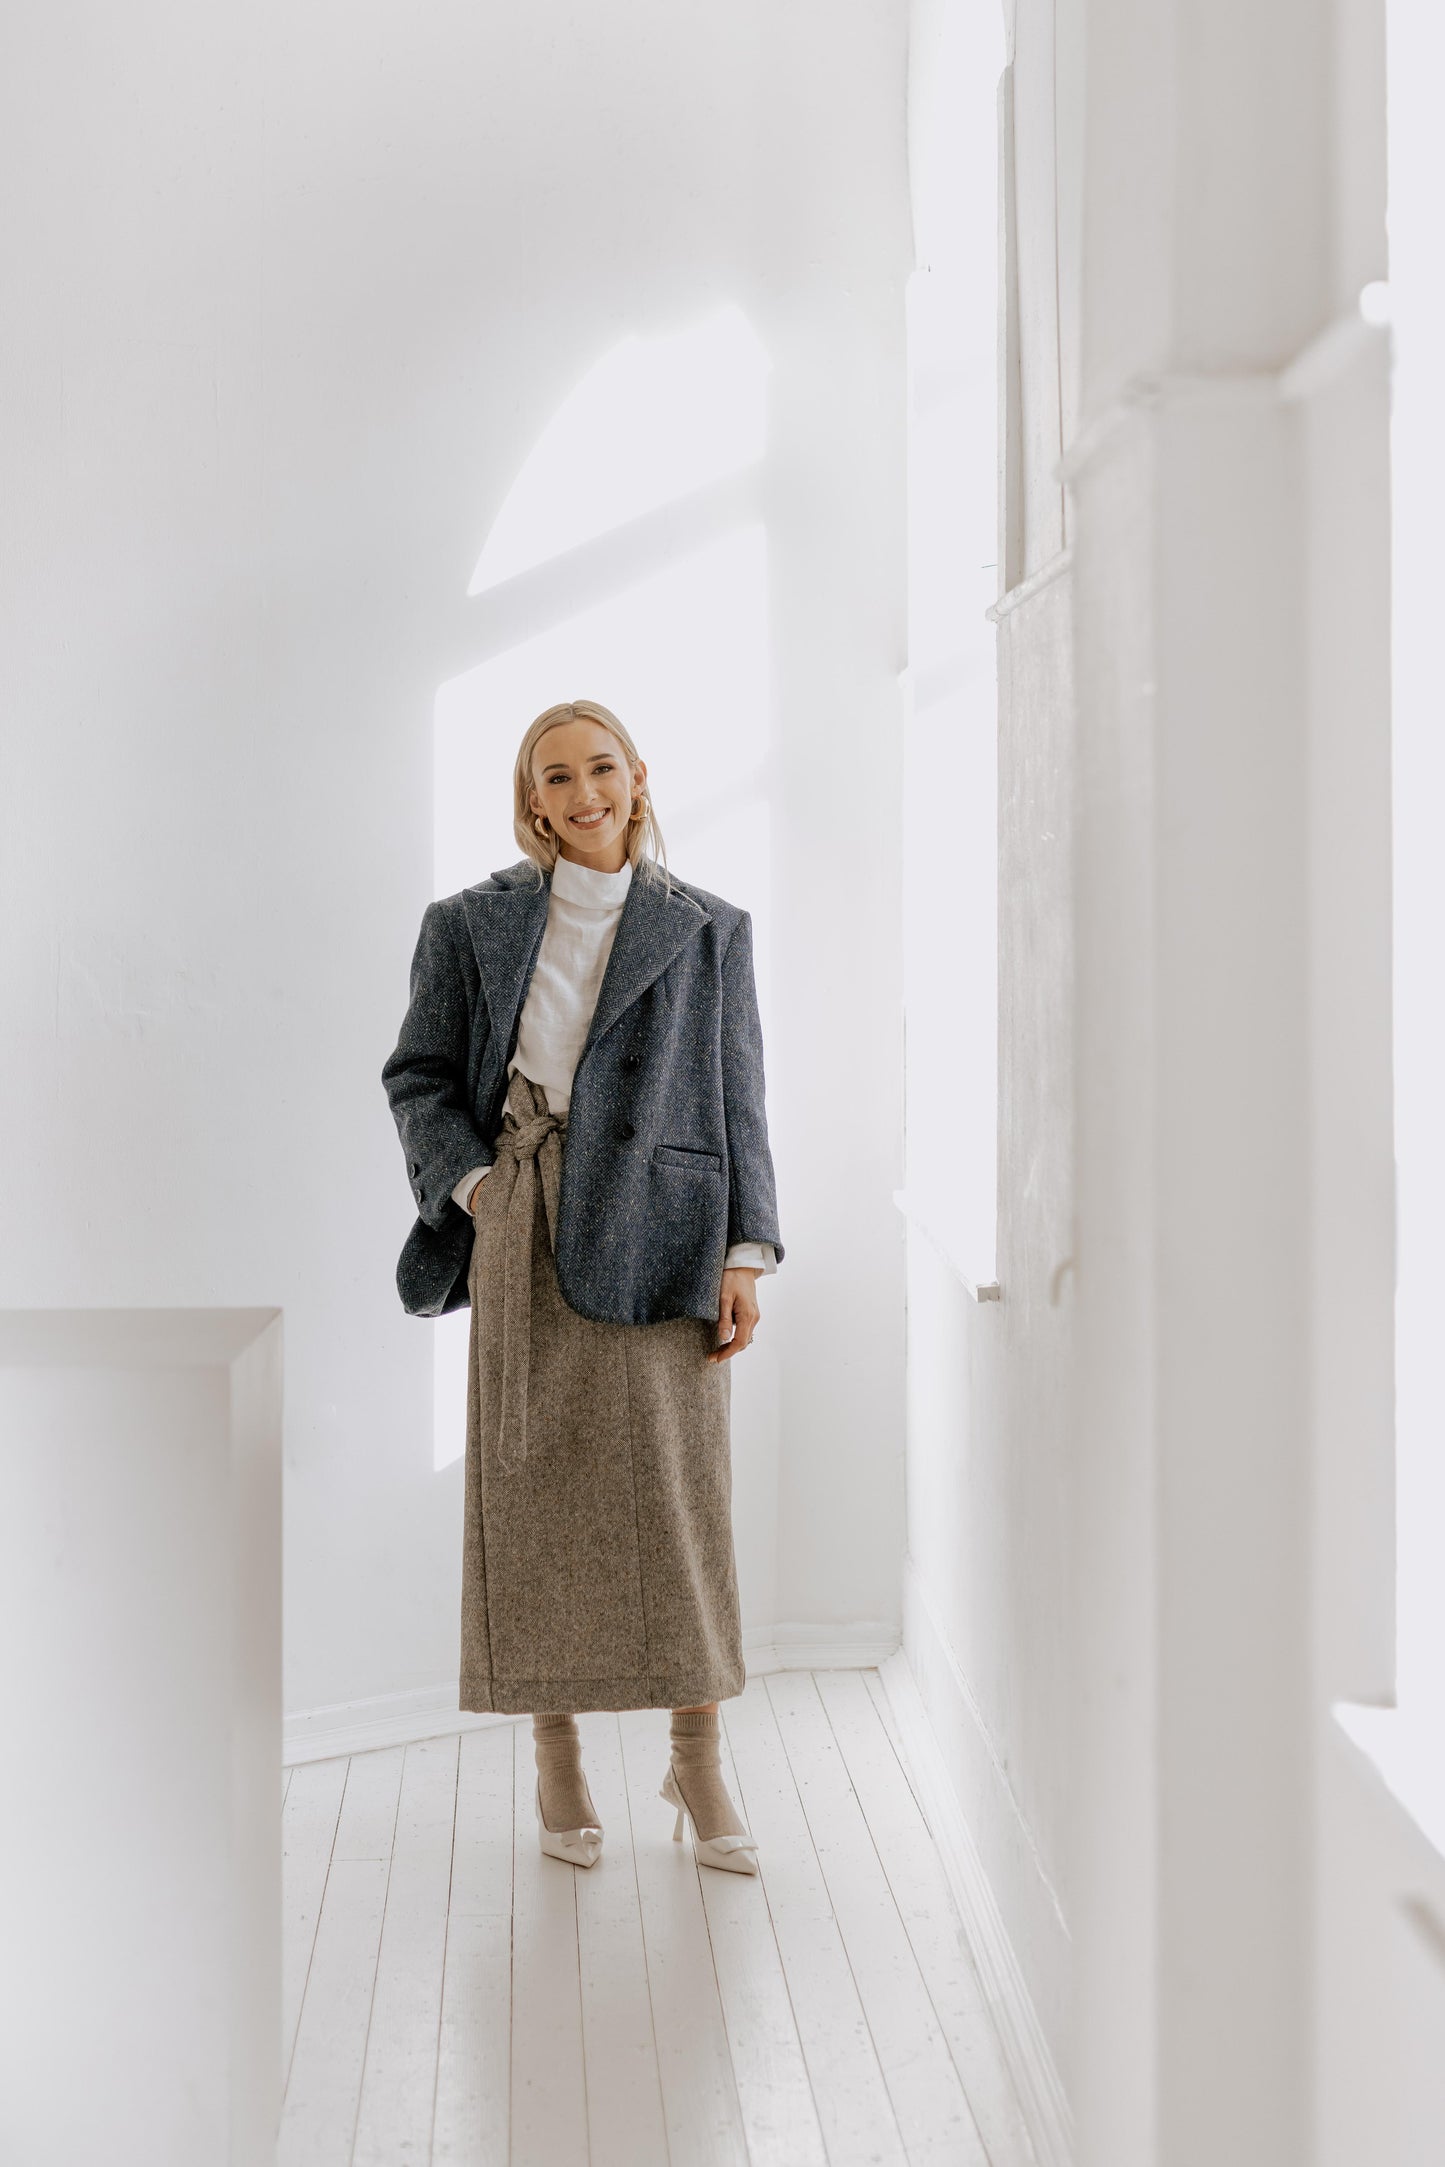 THE TWEED JACKET | We are so delighted to introduce a big new step for us as a brand by introducing Donegal Tweed to our core collection. An expansion of our deep love and passion for Irish textiles and keeping our rich heritage alive- originating in Co D